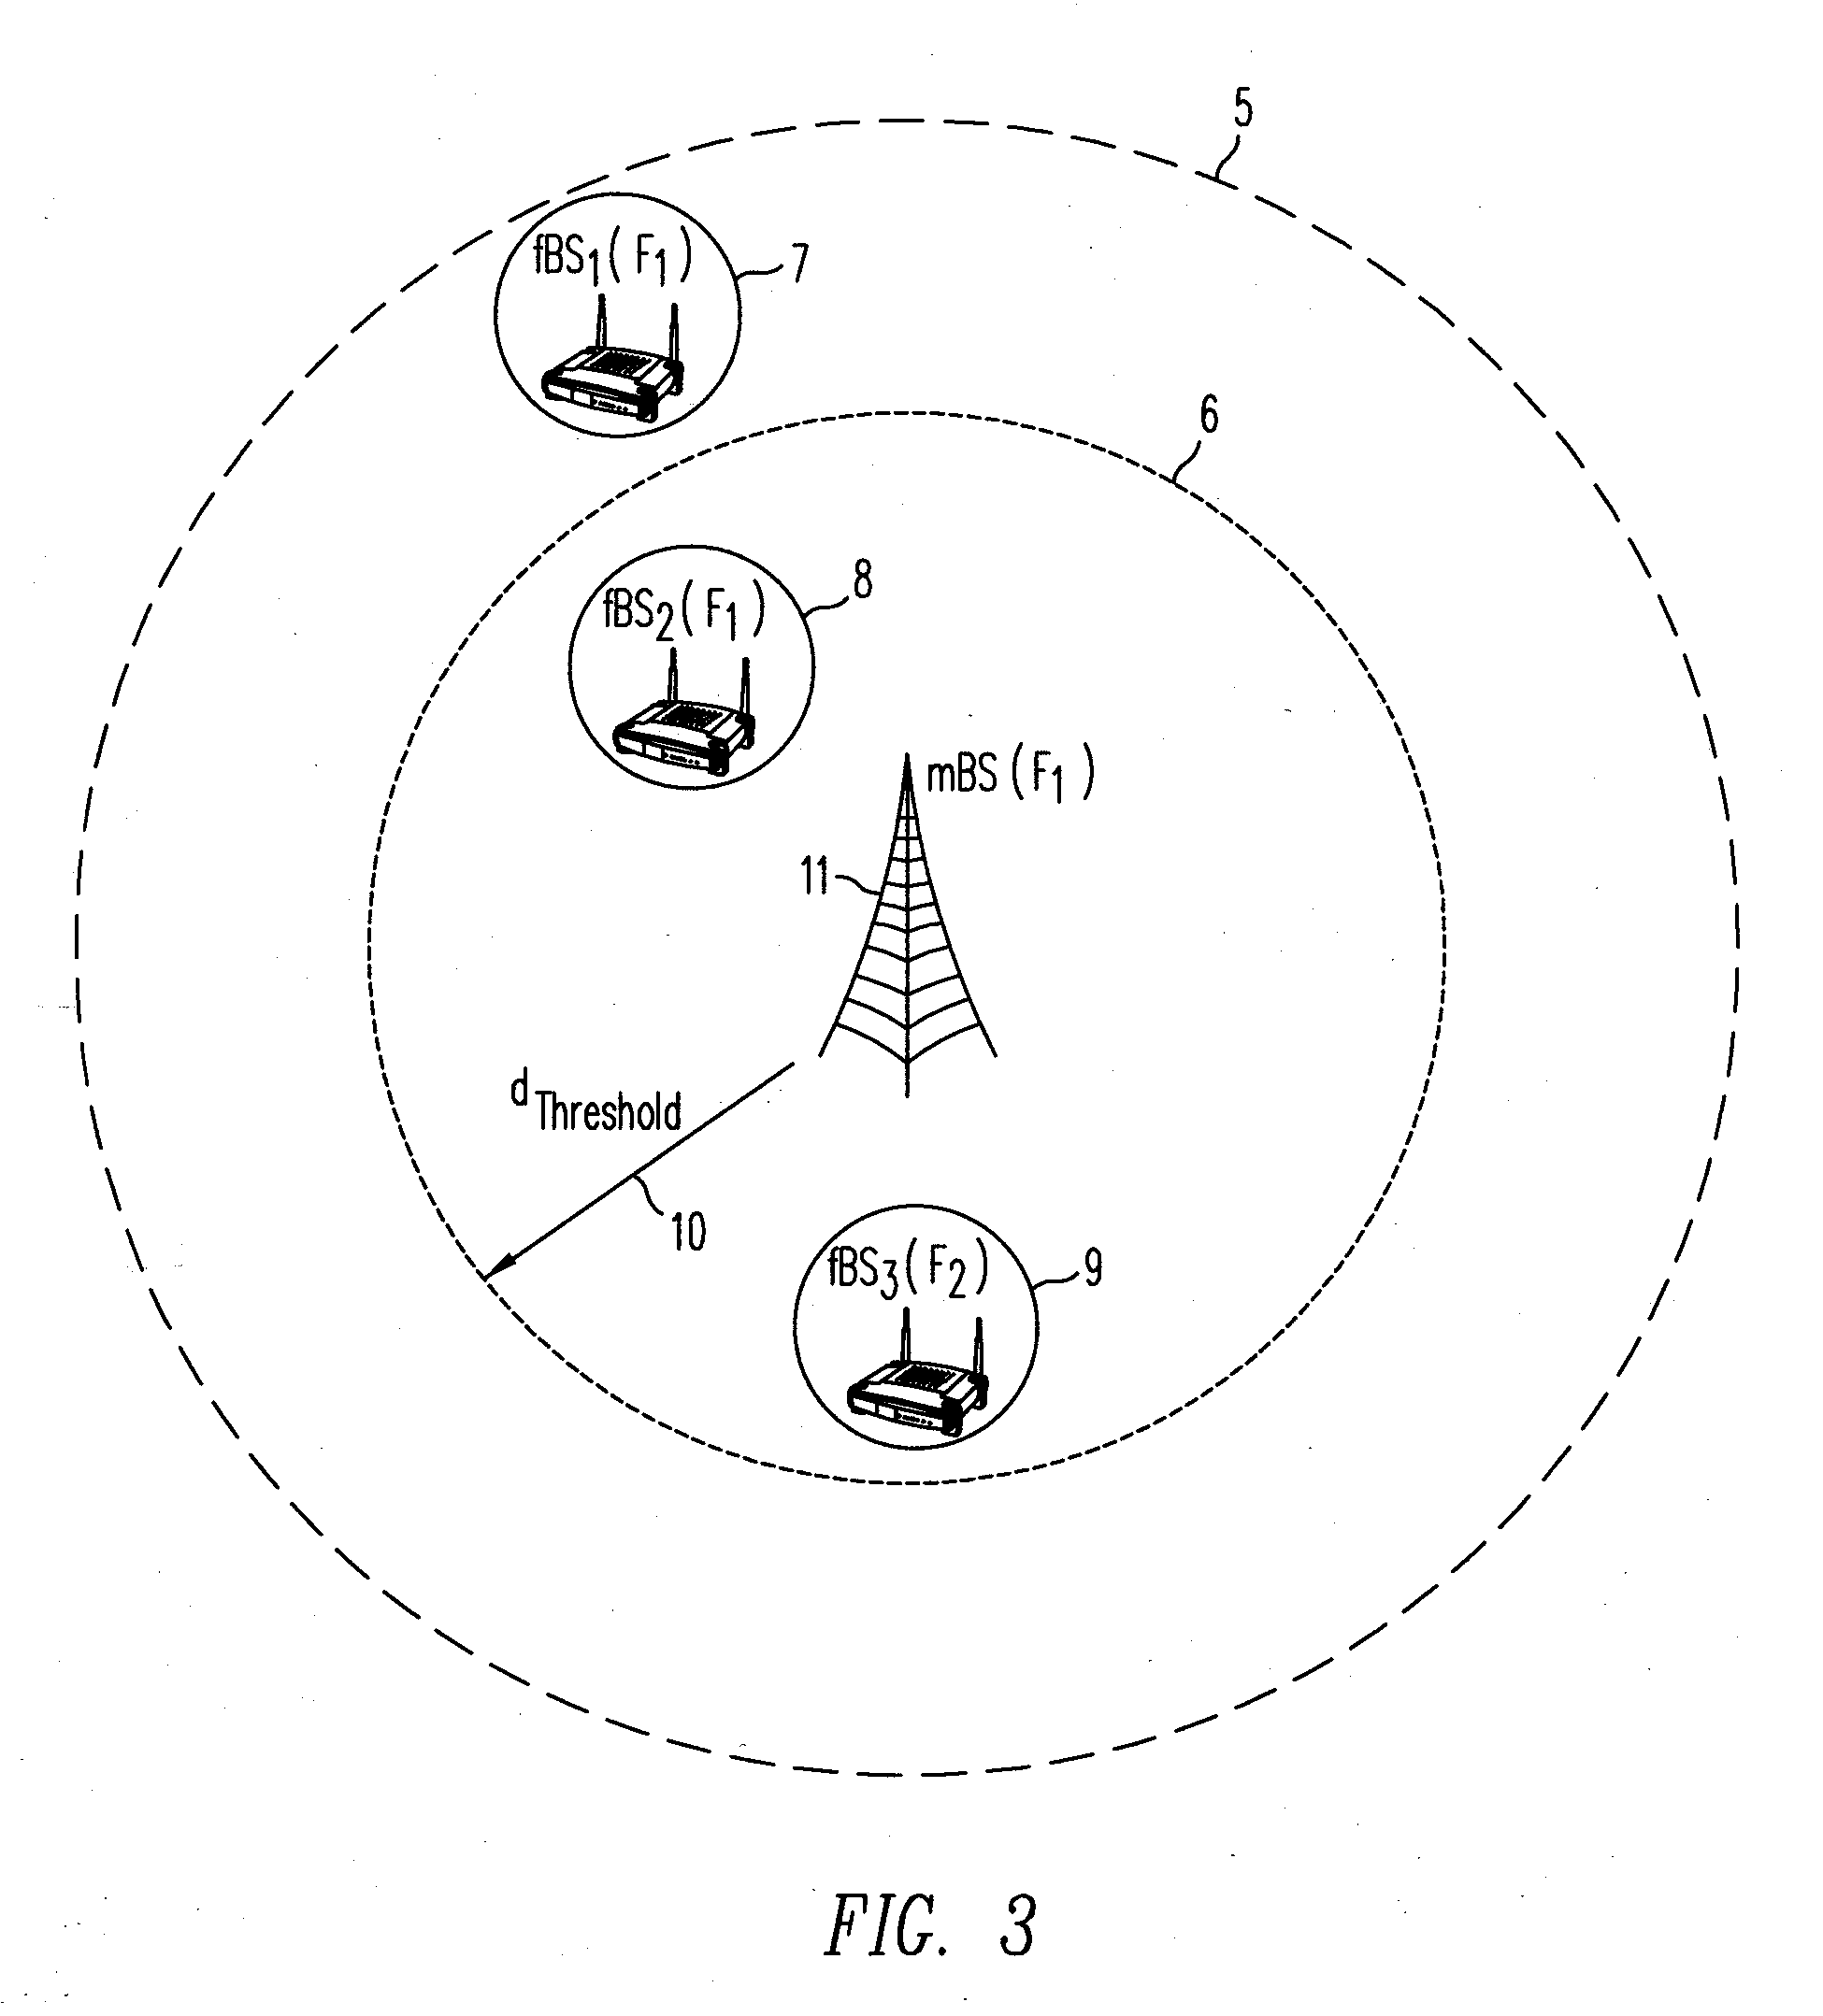 Femtocell Channel Assignment and Power Control for Improved Femtocell Coverage and Efficient Cell Search